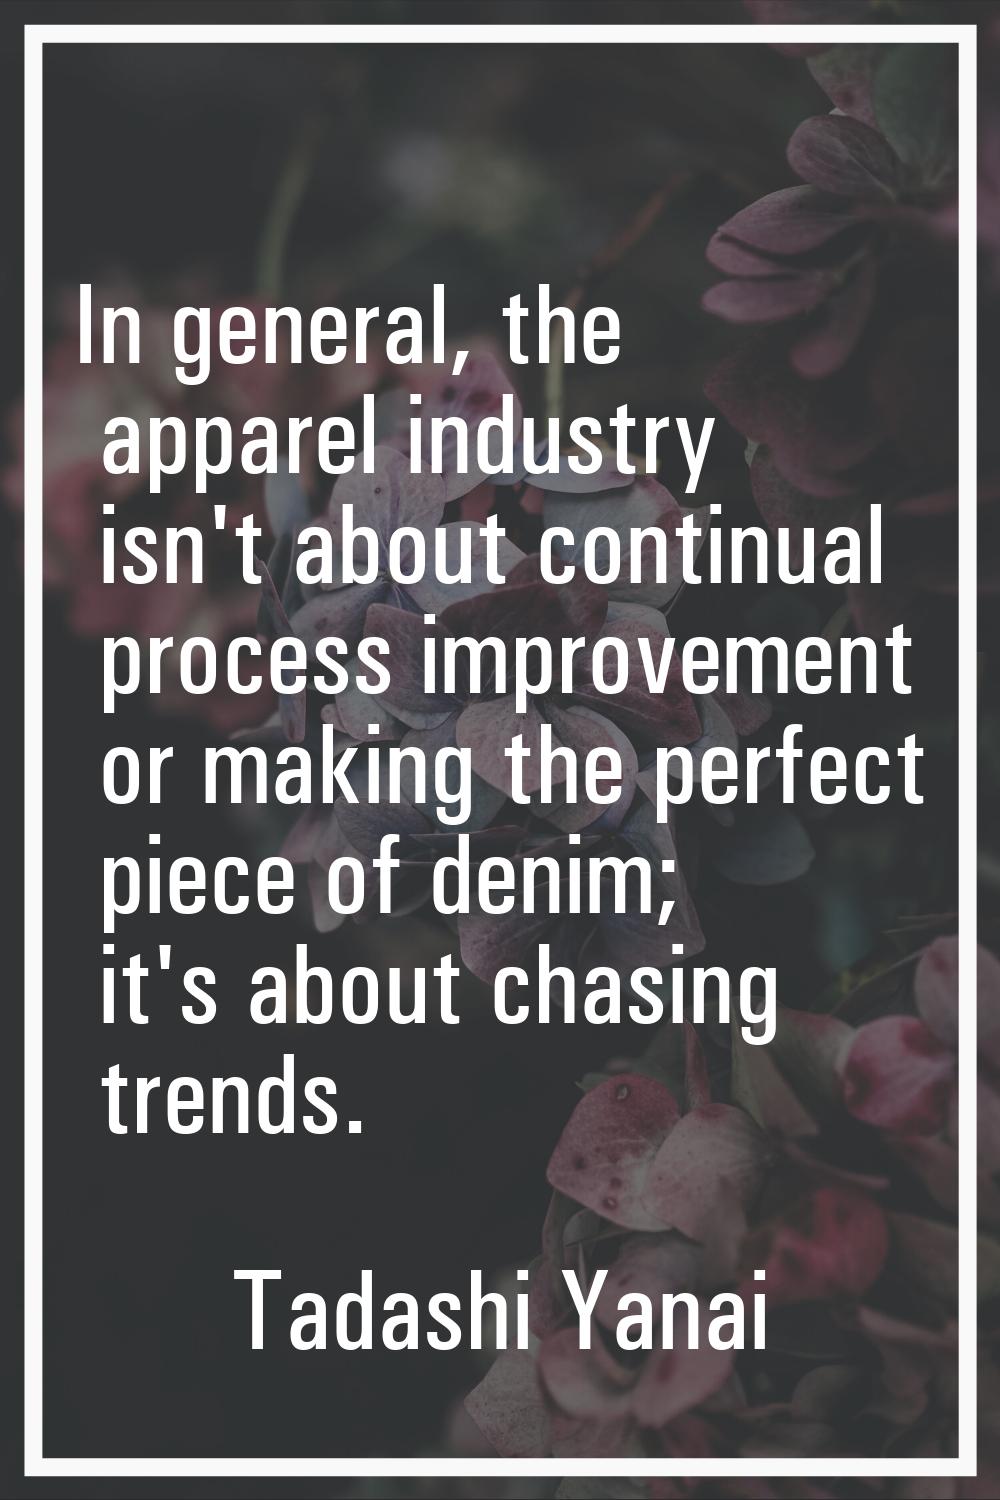 In general, the apparel industry isn't about continual process improvement or making the perfect pi